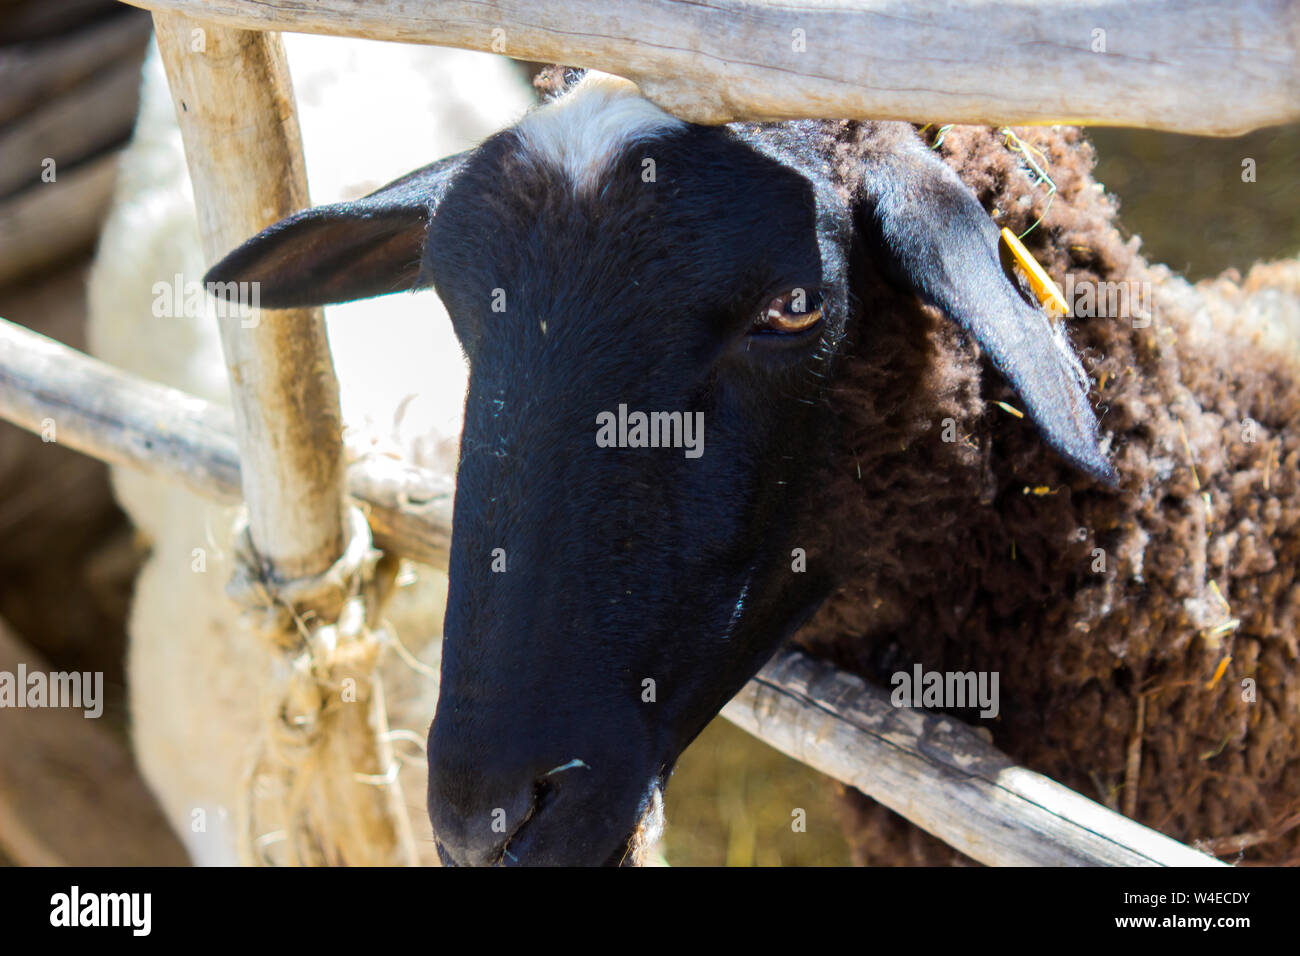 A traditional Black faced sheep penned and on display in the Nazxareth Village Open Air Museum in the North of Israel Stock Photo